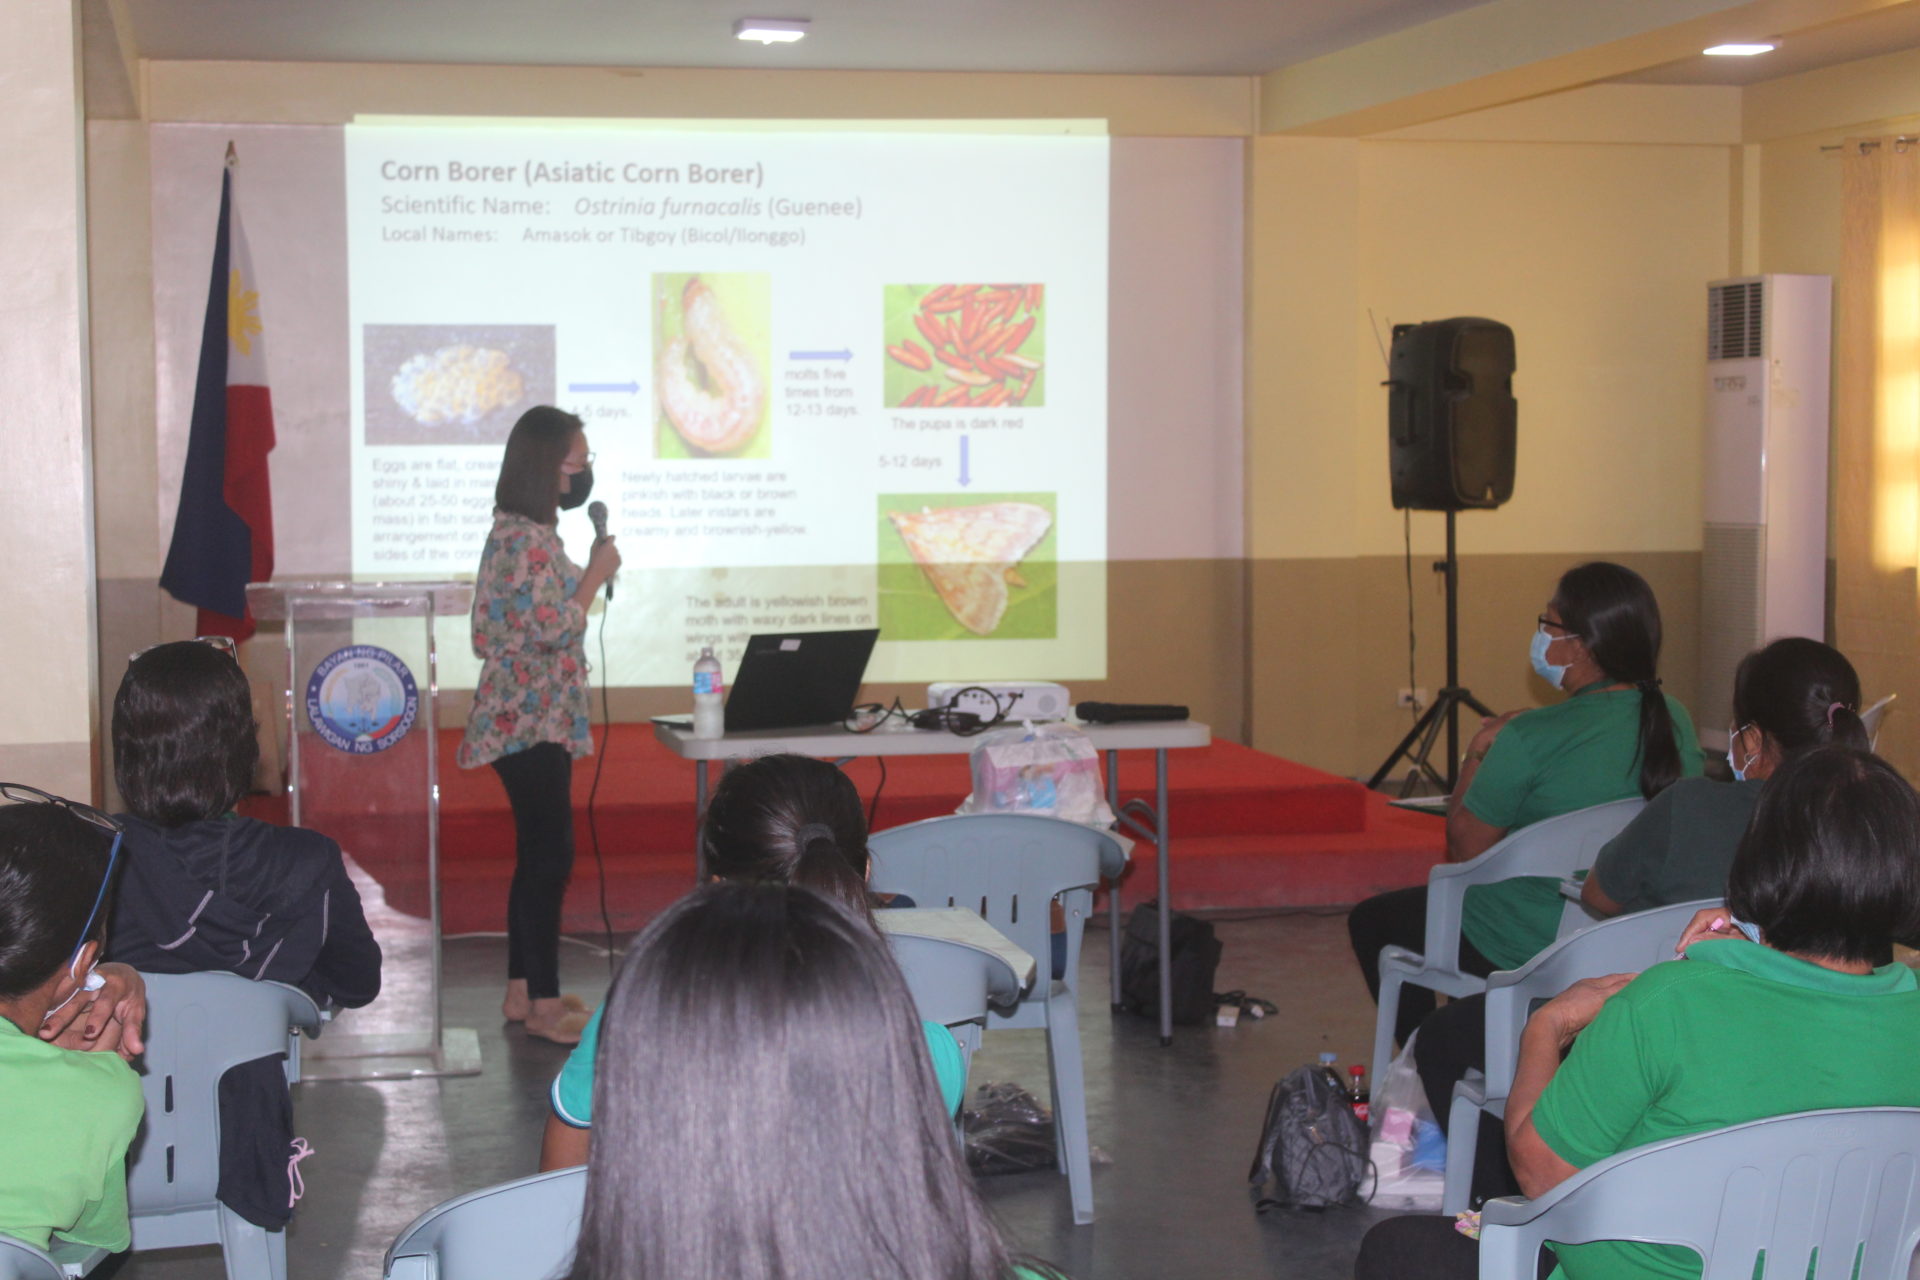 DA RFO 5 conducts Training on Corn Production to SAAD Beneficiaries of Pilar